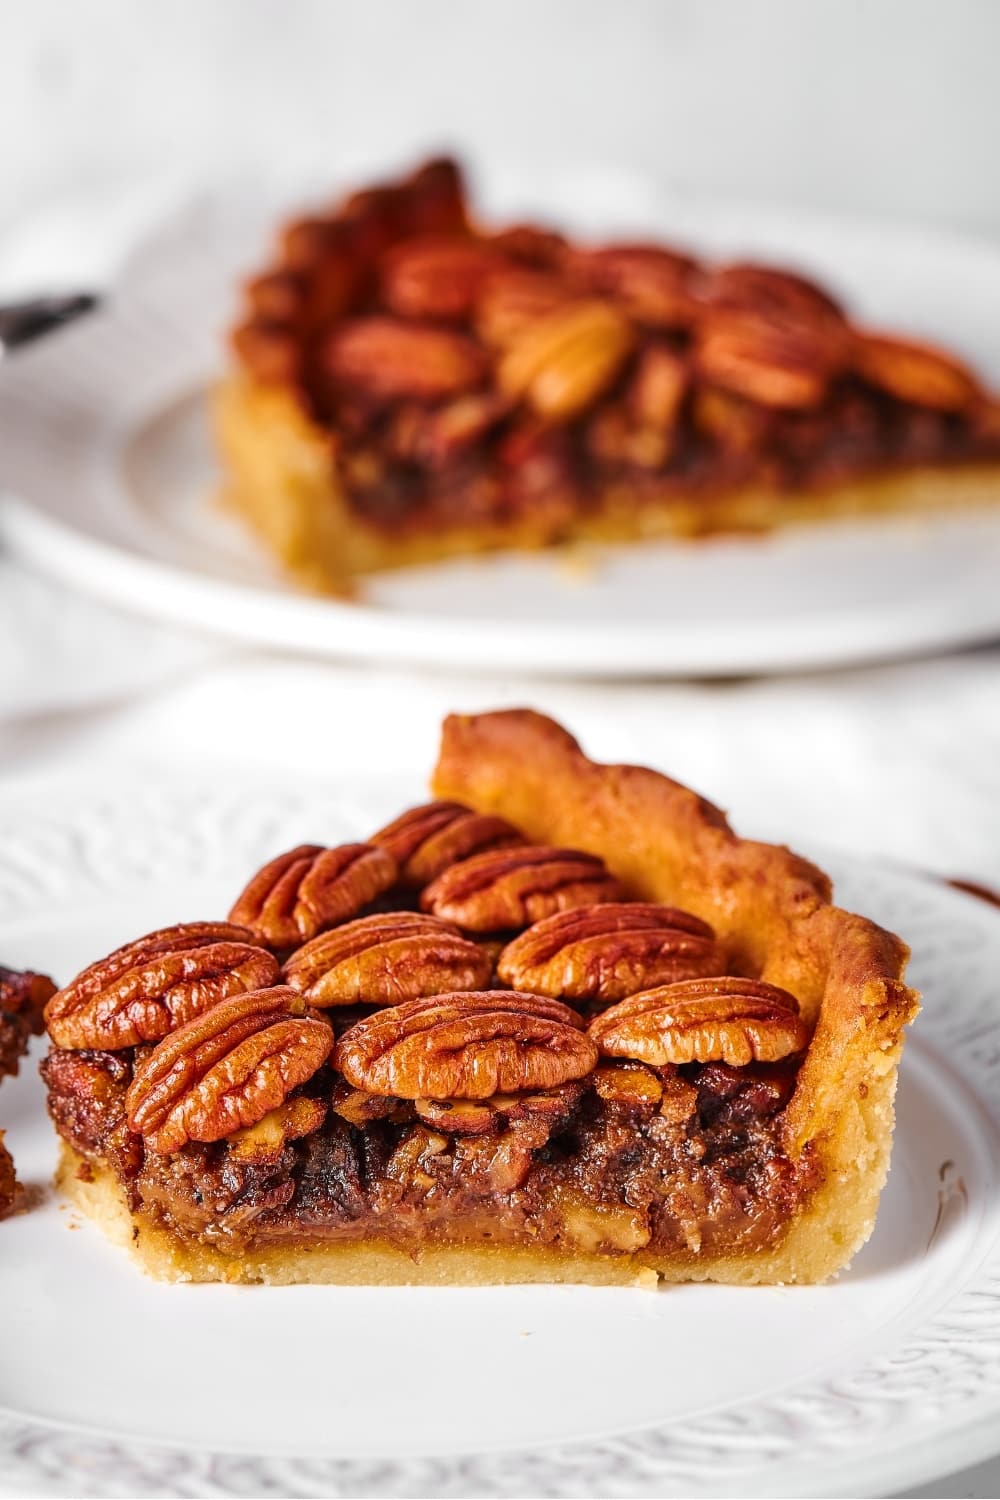 A Sideview of a slice of pecan pie on a white plate. Behind that is another slice of pecan pie on a white plate.